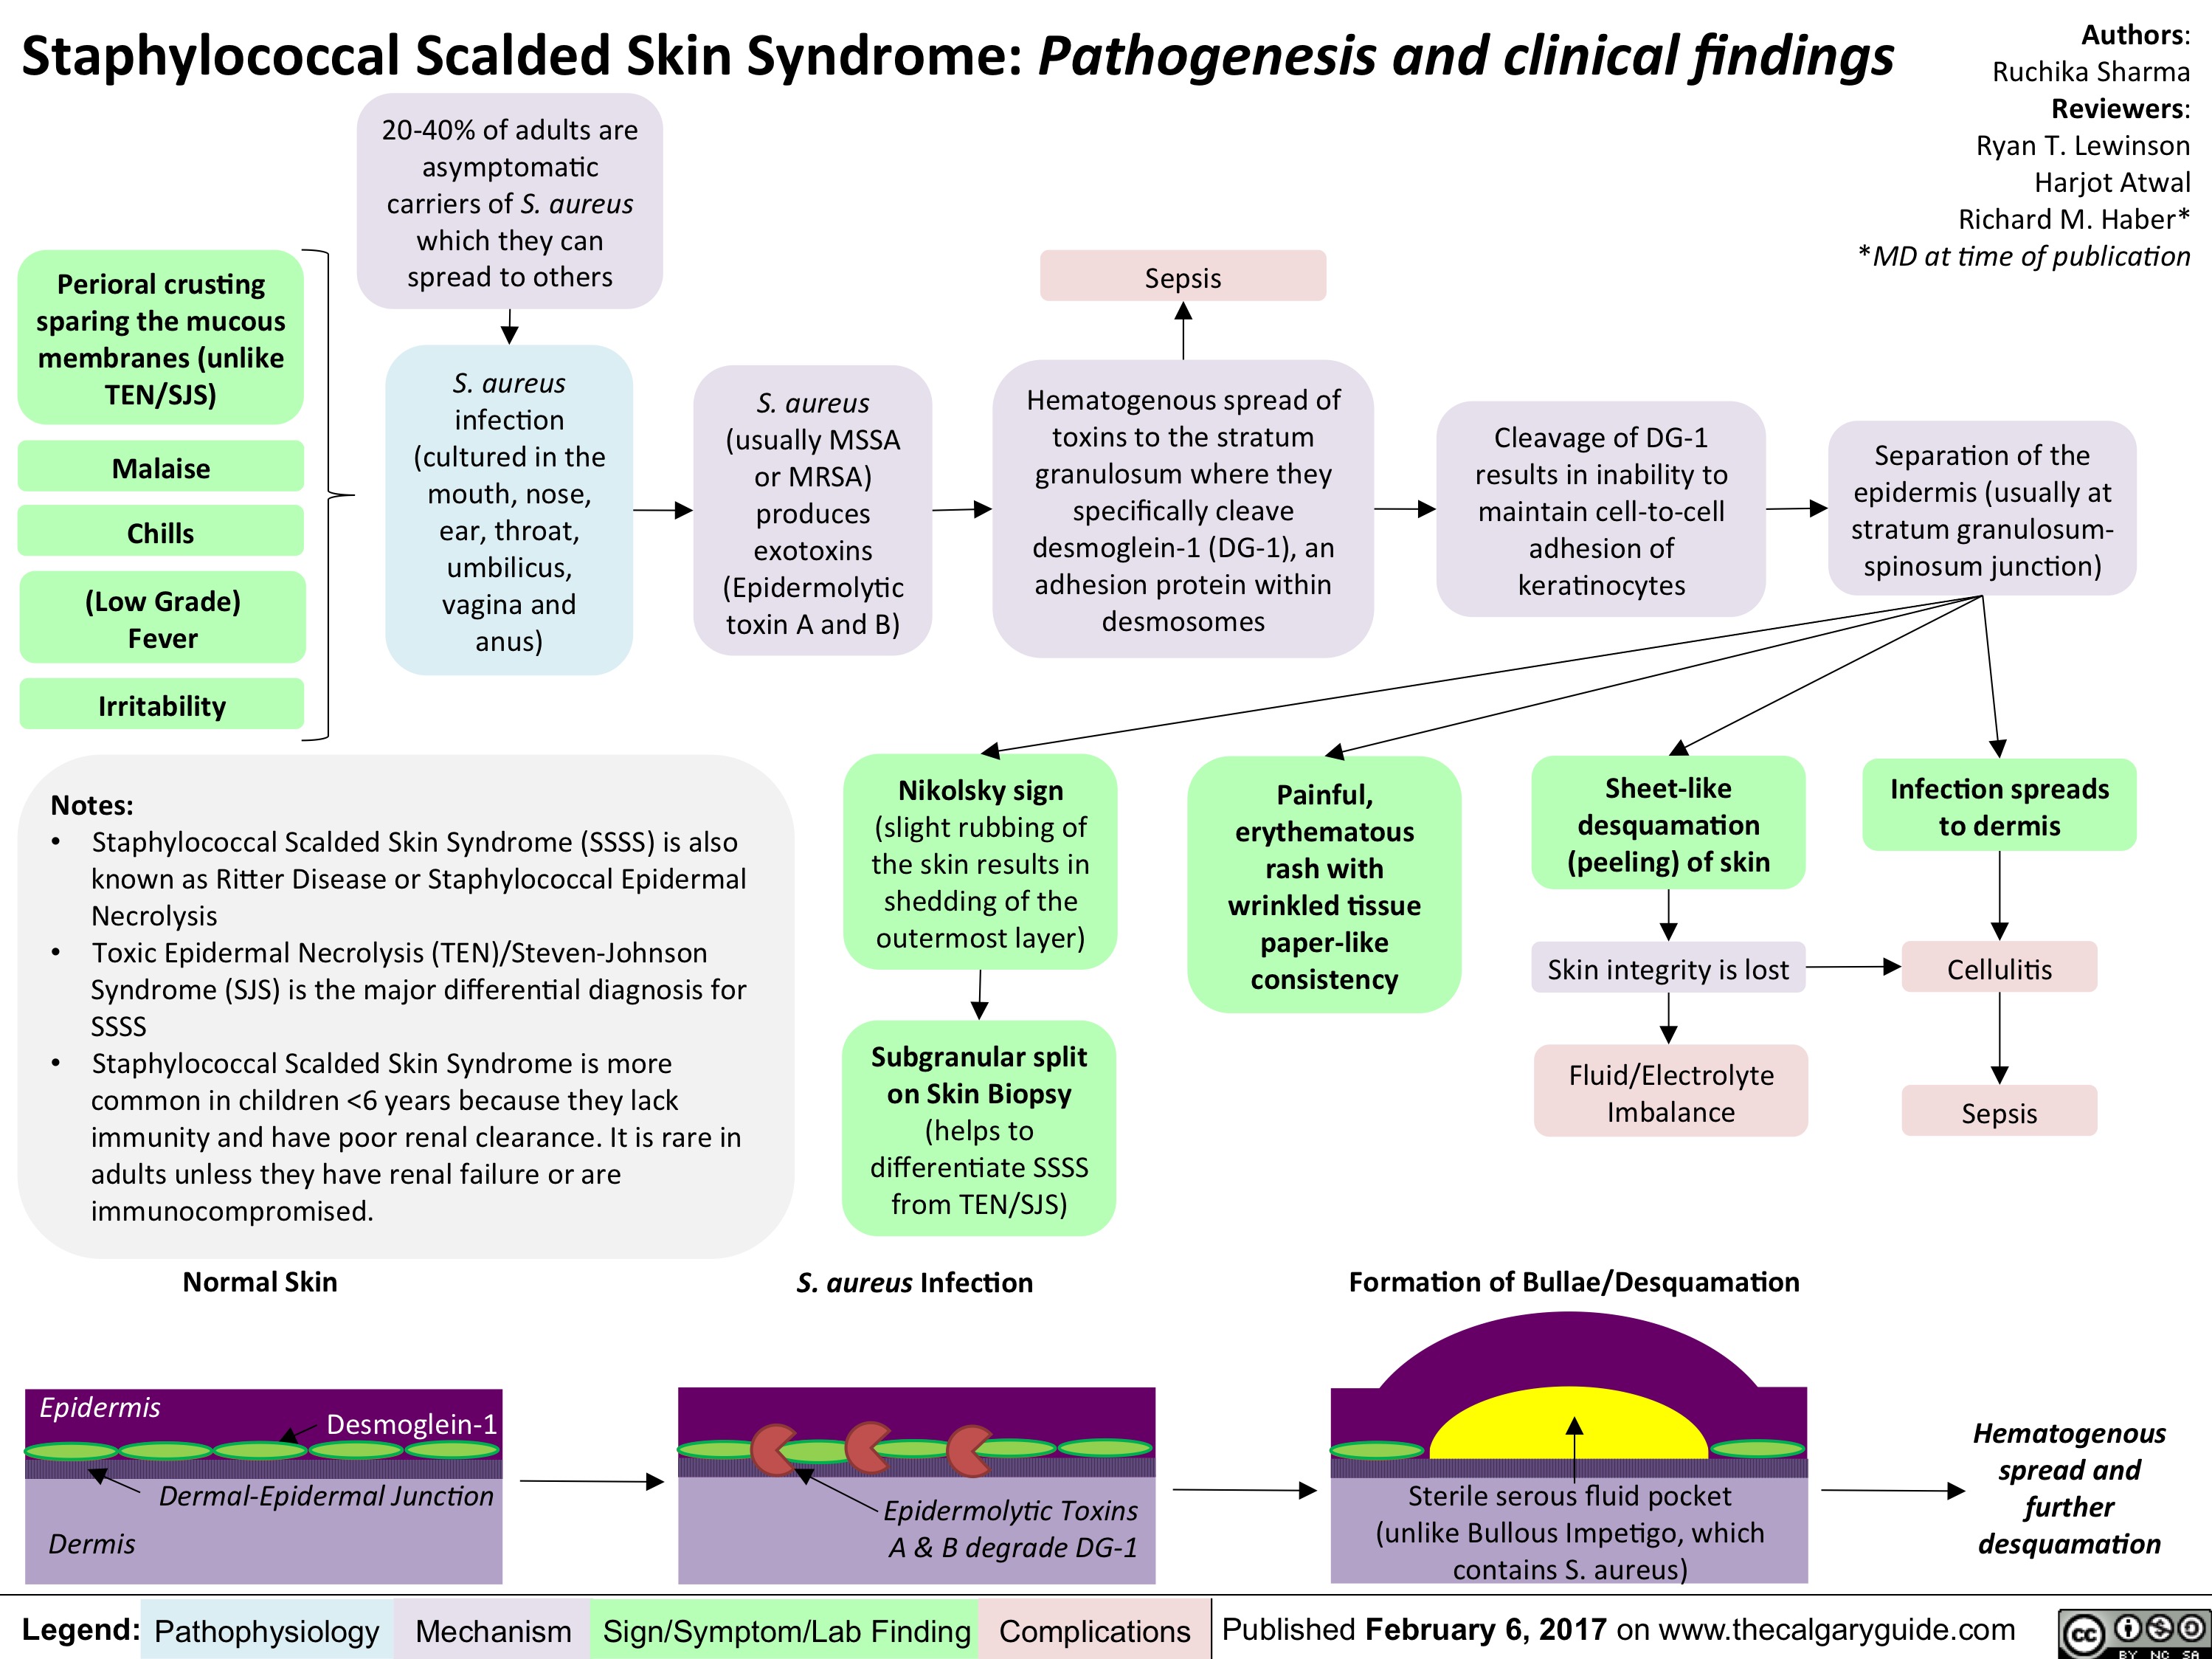 Staphylococcal Scalded Skin Syndrome Pathogenesis And Clinical